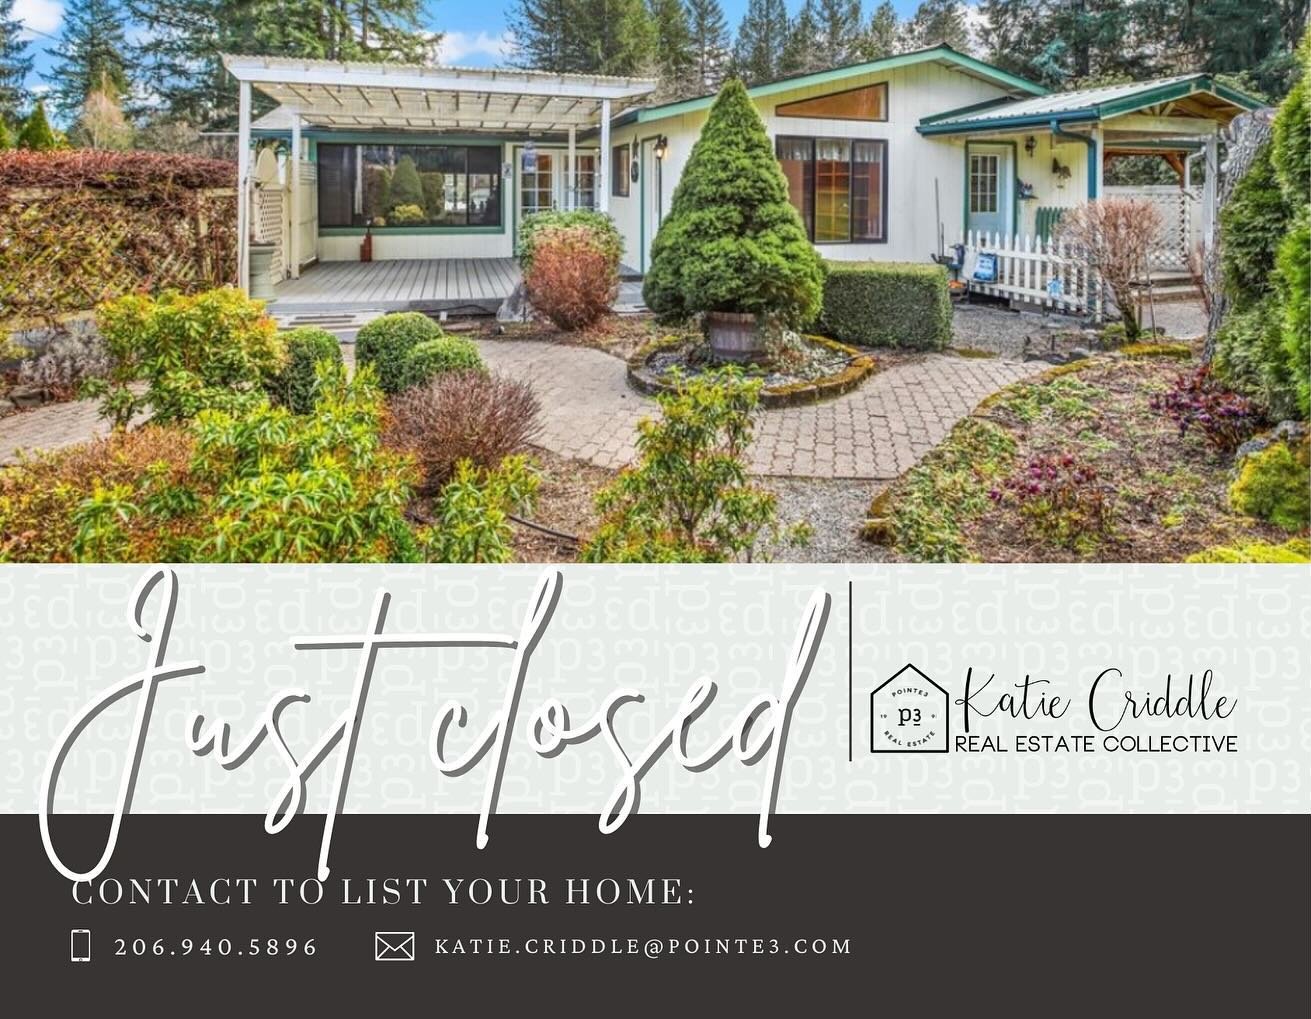 Congratulations to my buyer on the closing of their beautiful property! It&rsquo;s a stunning 5 acres with two homes and a perfect barn for horses&hellip; or Emus &mdash; that&rsquo;s what used to lived there 🦙 

#justlisted #seattlerealestate #seat